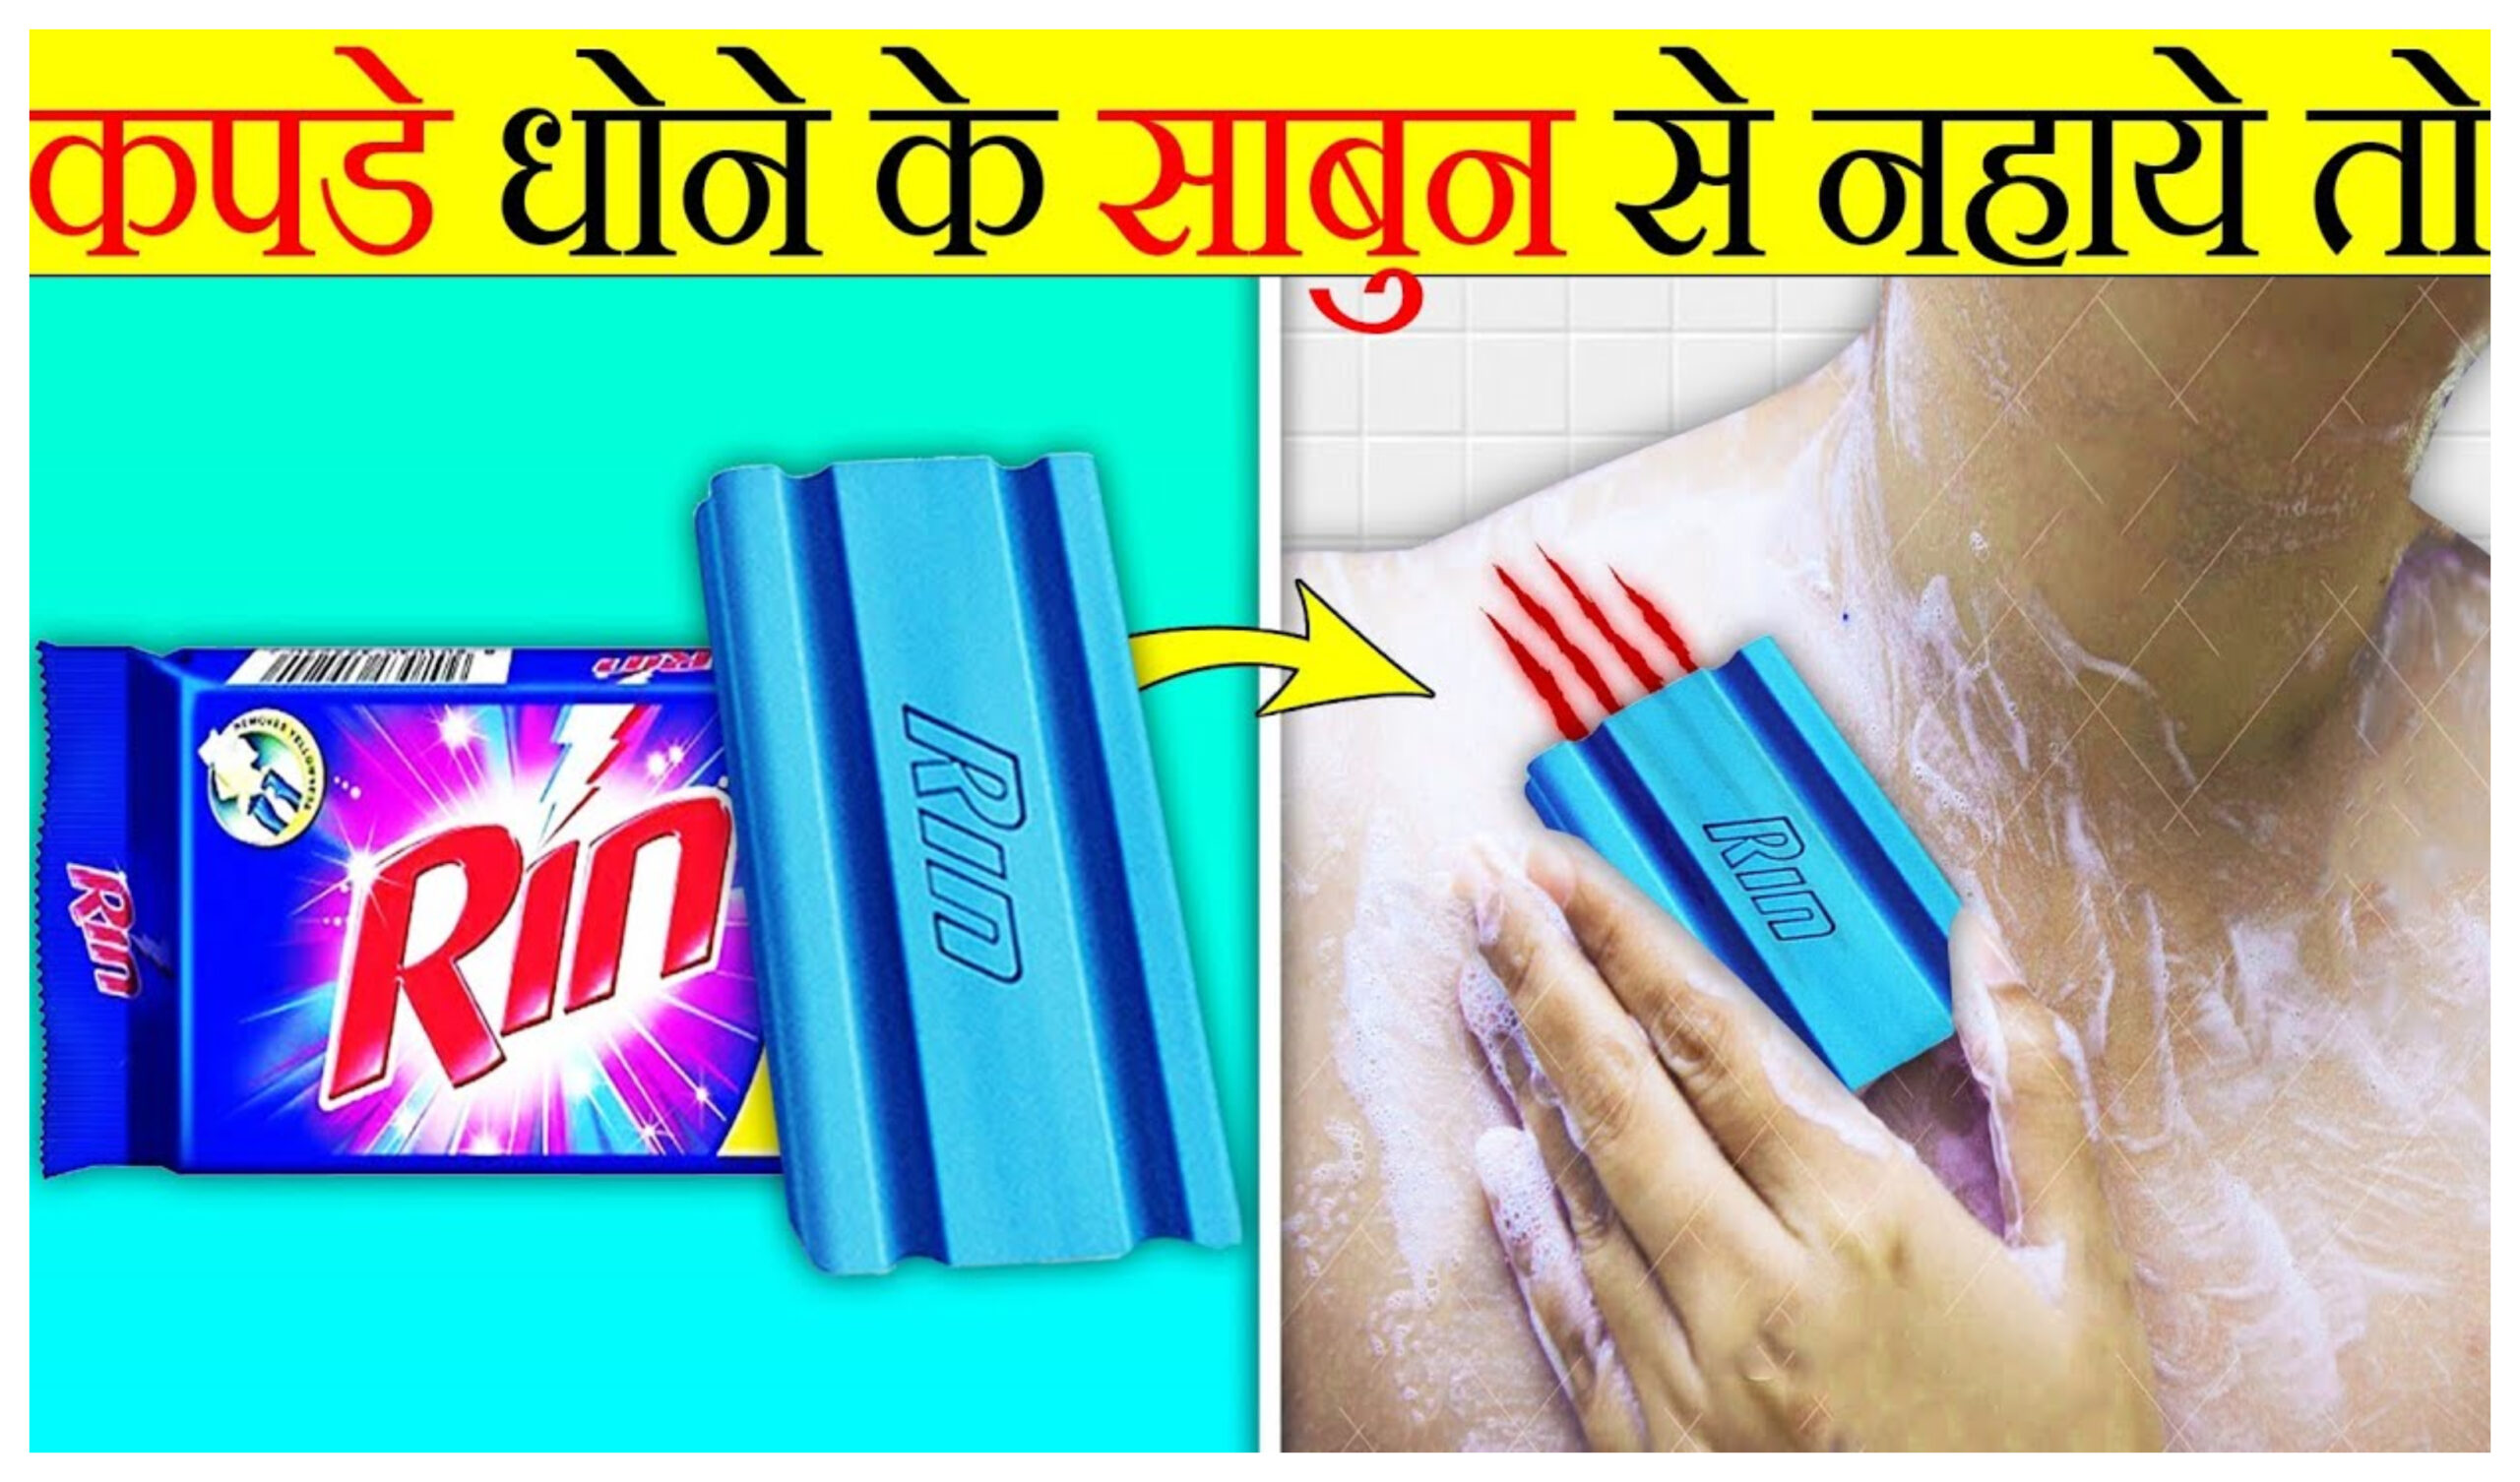 Soap Side Effects: Bathing with laundry soap causes diseases, it-is-dangerous-to-bathe-with-laundry-soap in hindi news, Washing Soap , bath soap , health problems , detergent powder , chemicals , bleach , skin swelling , Rashes